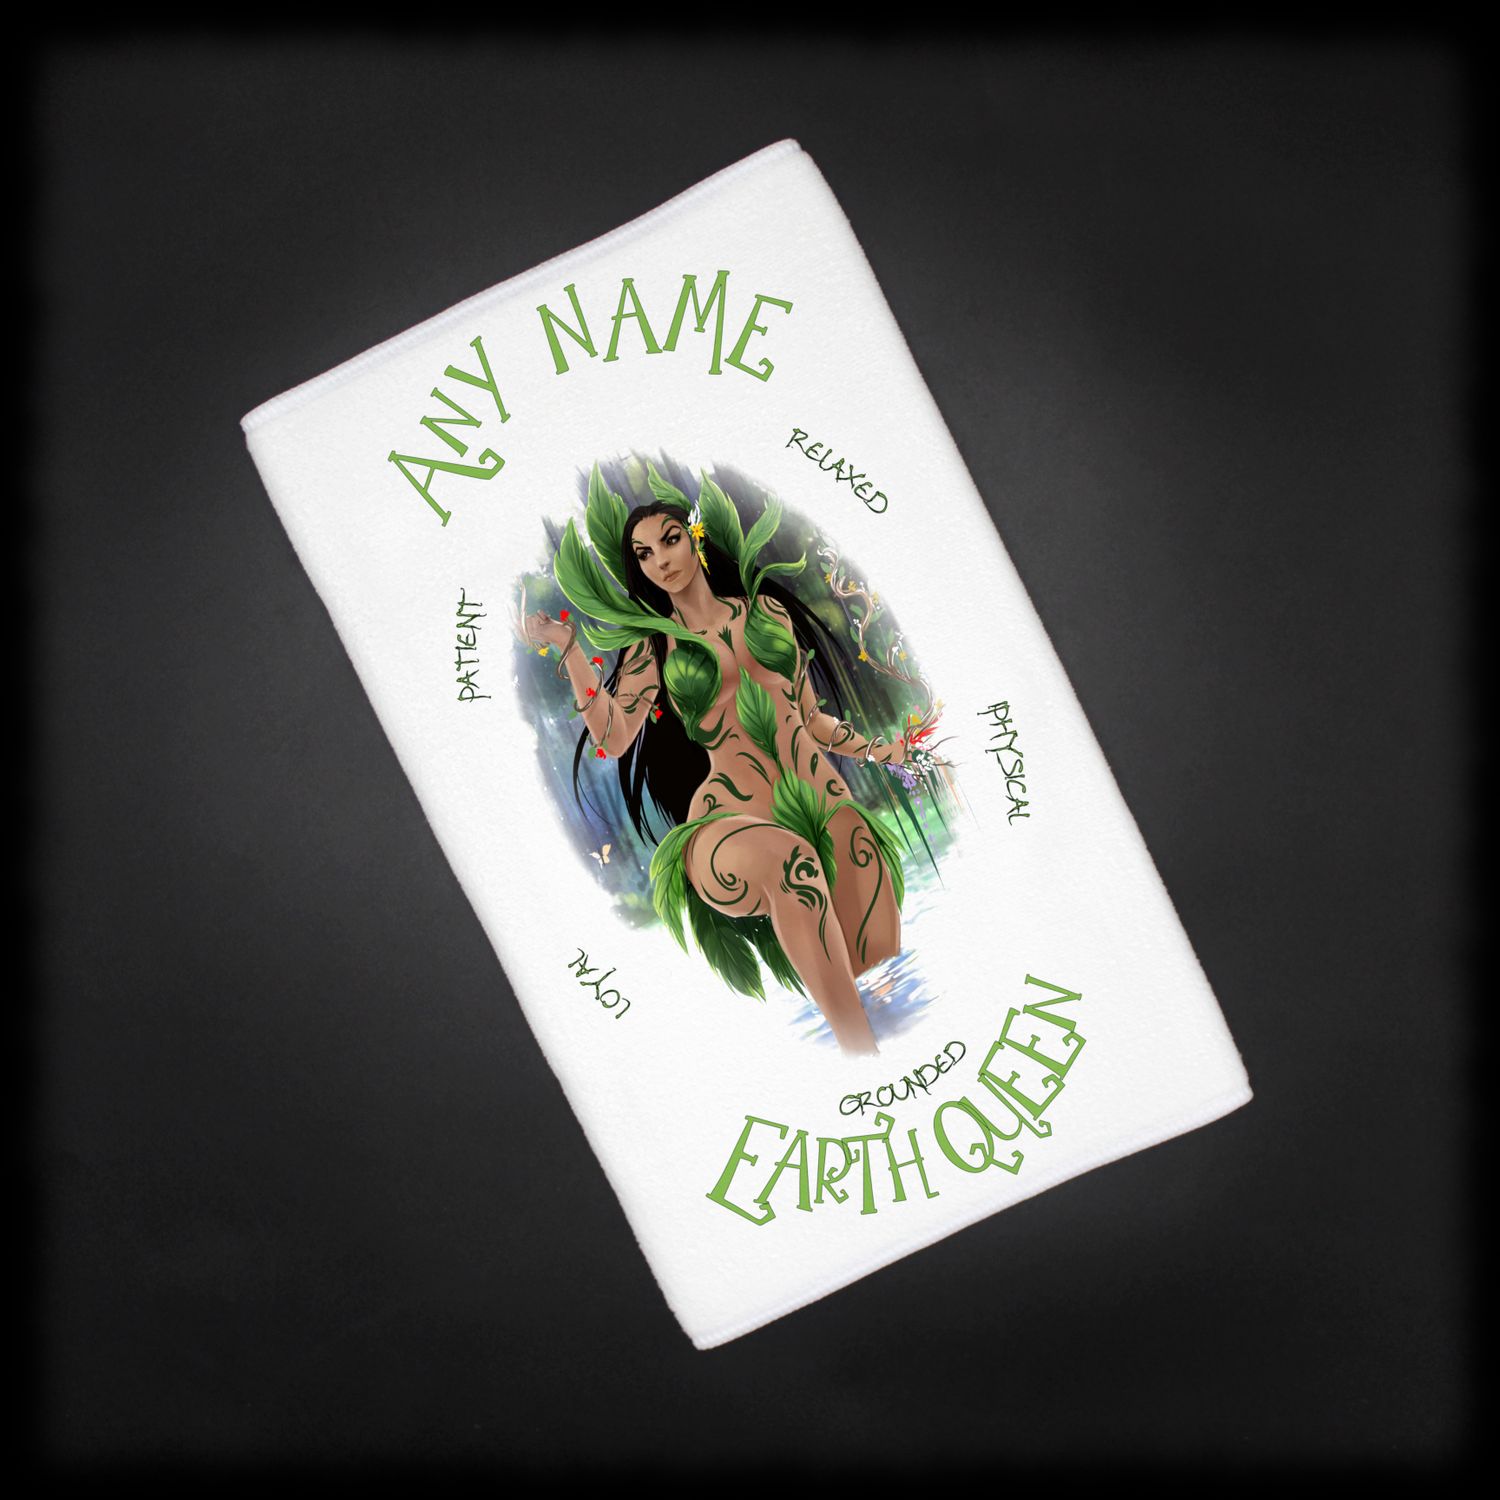 Naturally Wicked Earth Queen Towel Personalised With Any Name - The Perfect Unique Gift For Her